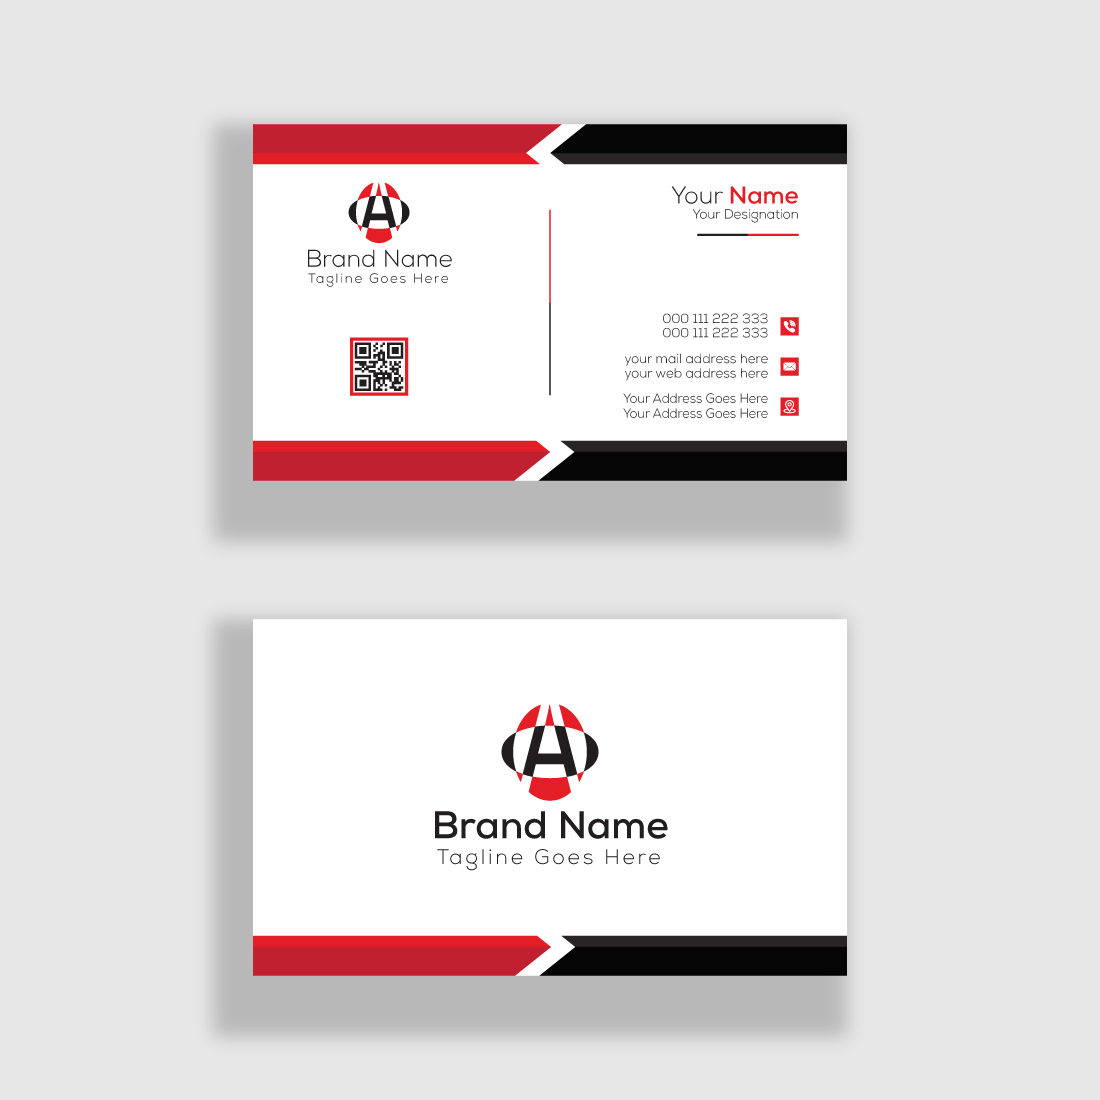 Corporate Business Card Template cover image.